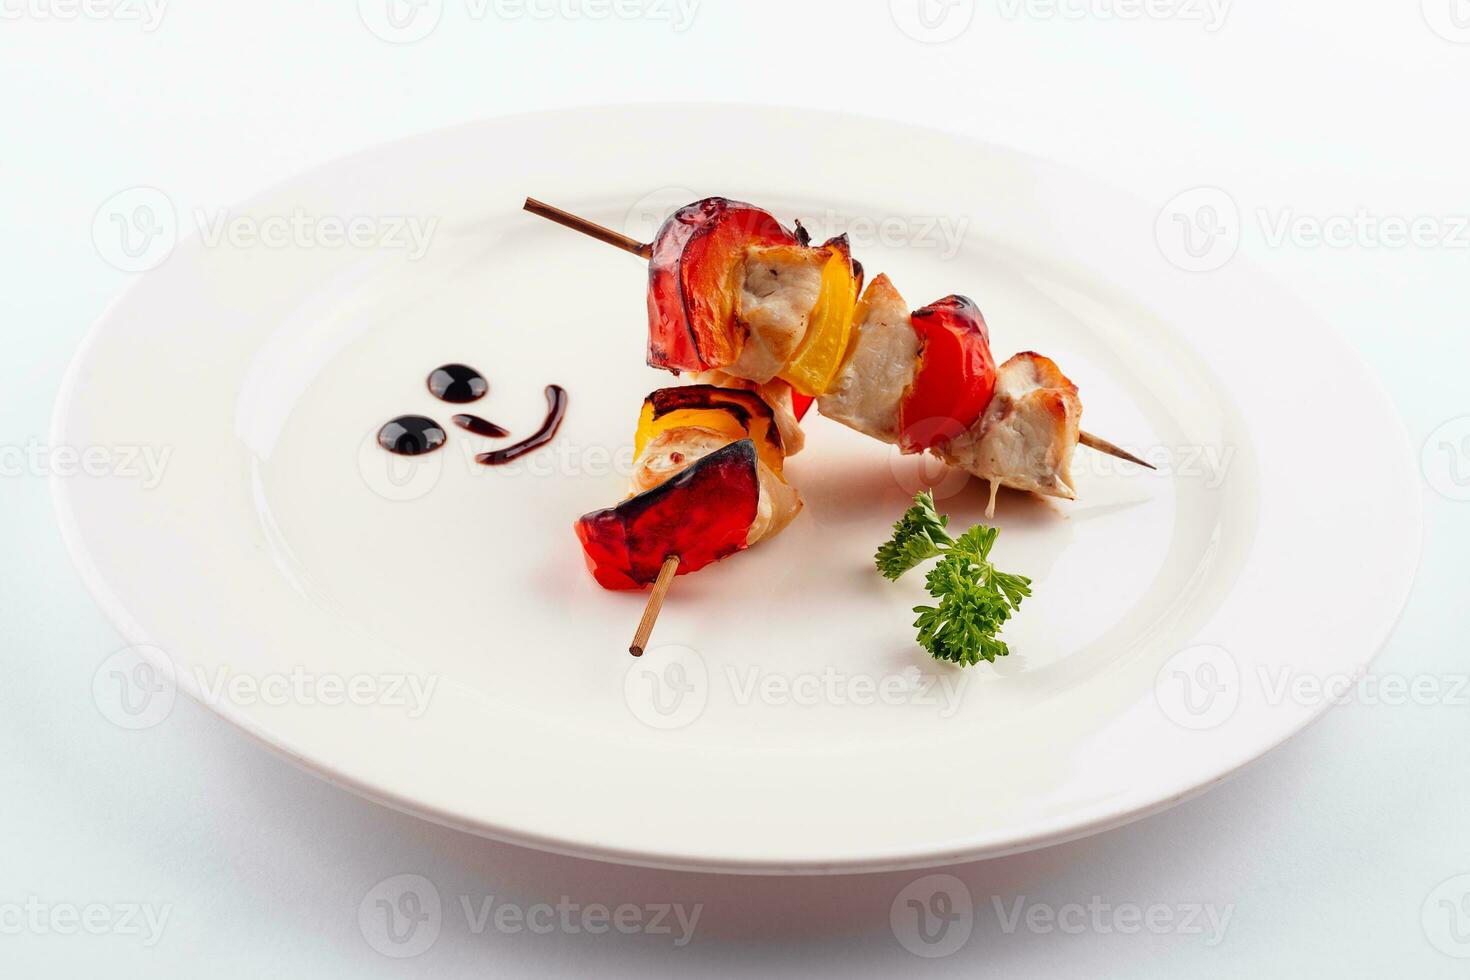 Chicken kebab on plate, close up view photo